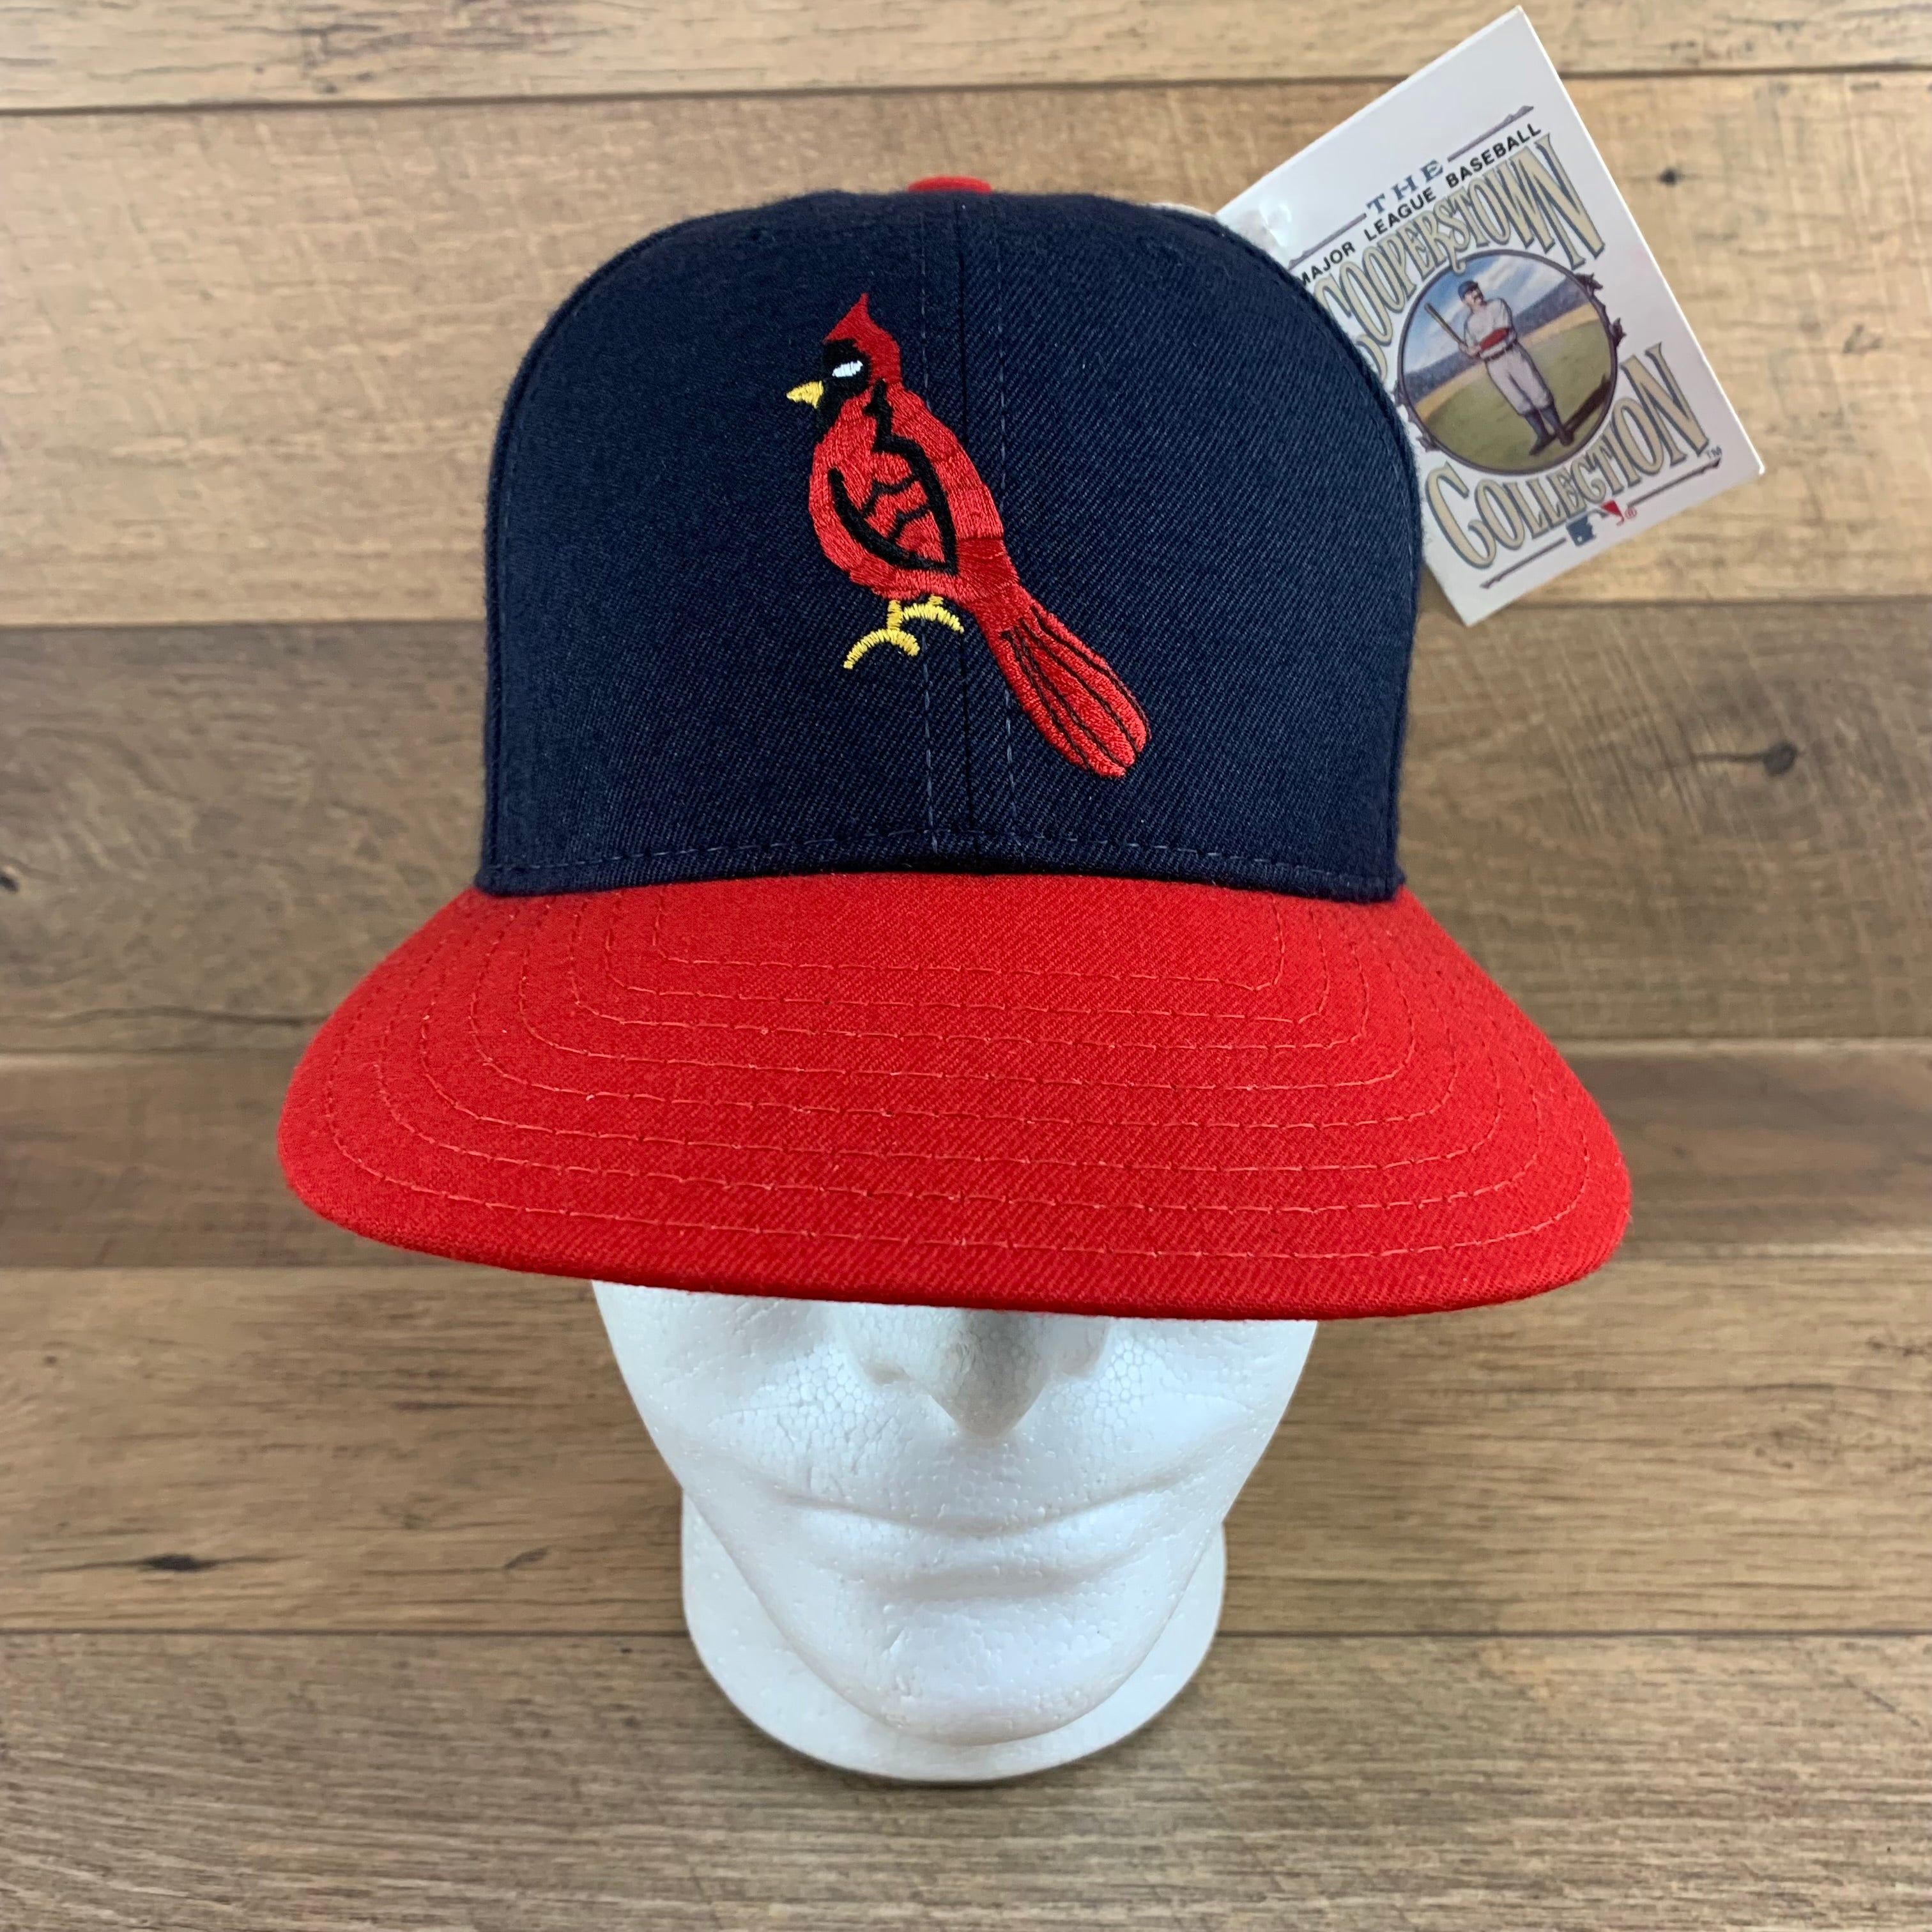 NWT St. Louis Cardinals MLB Cooperstown Collection Hat Men 7 1/4 Red Rare  VTG H2